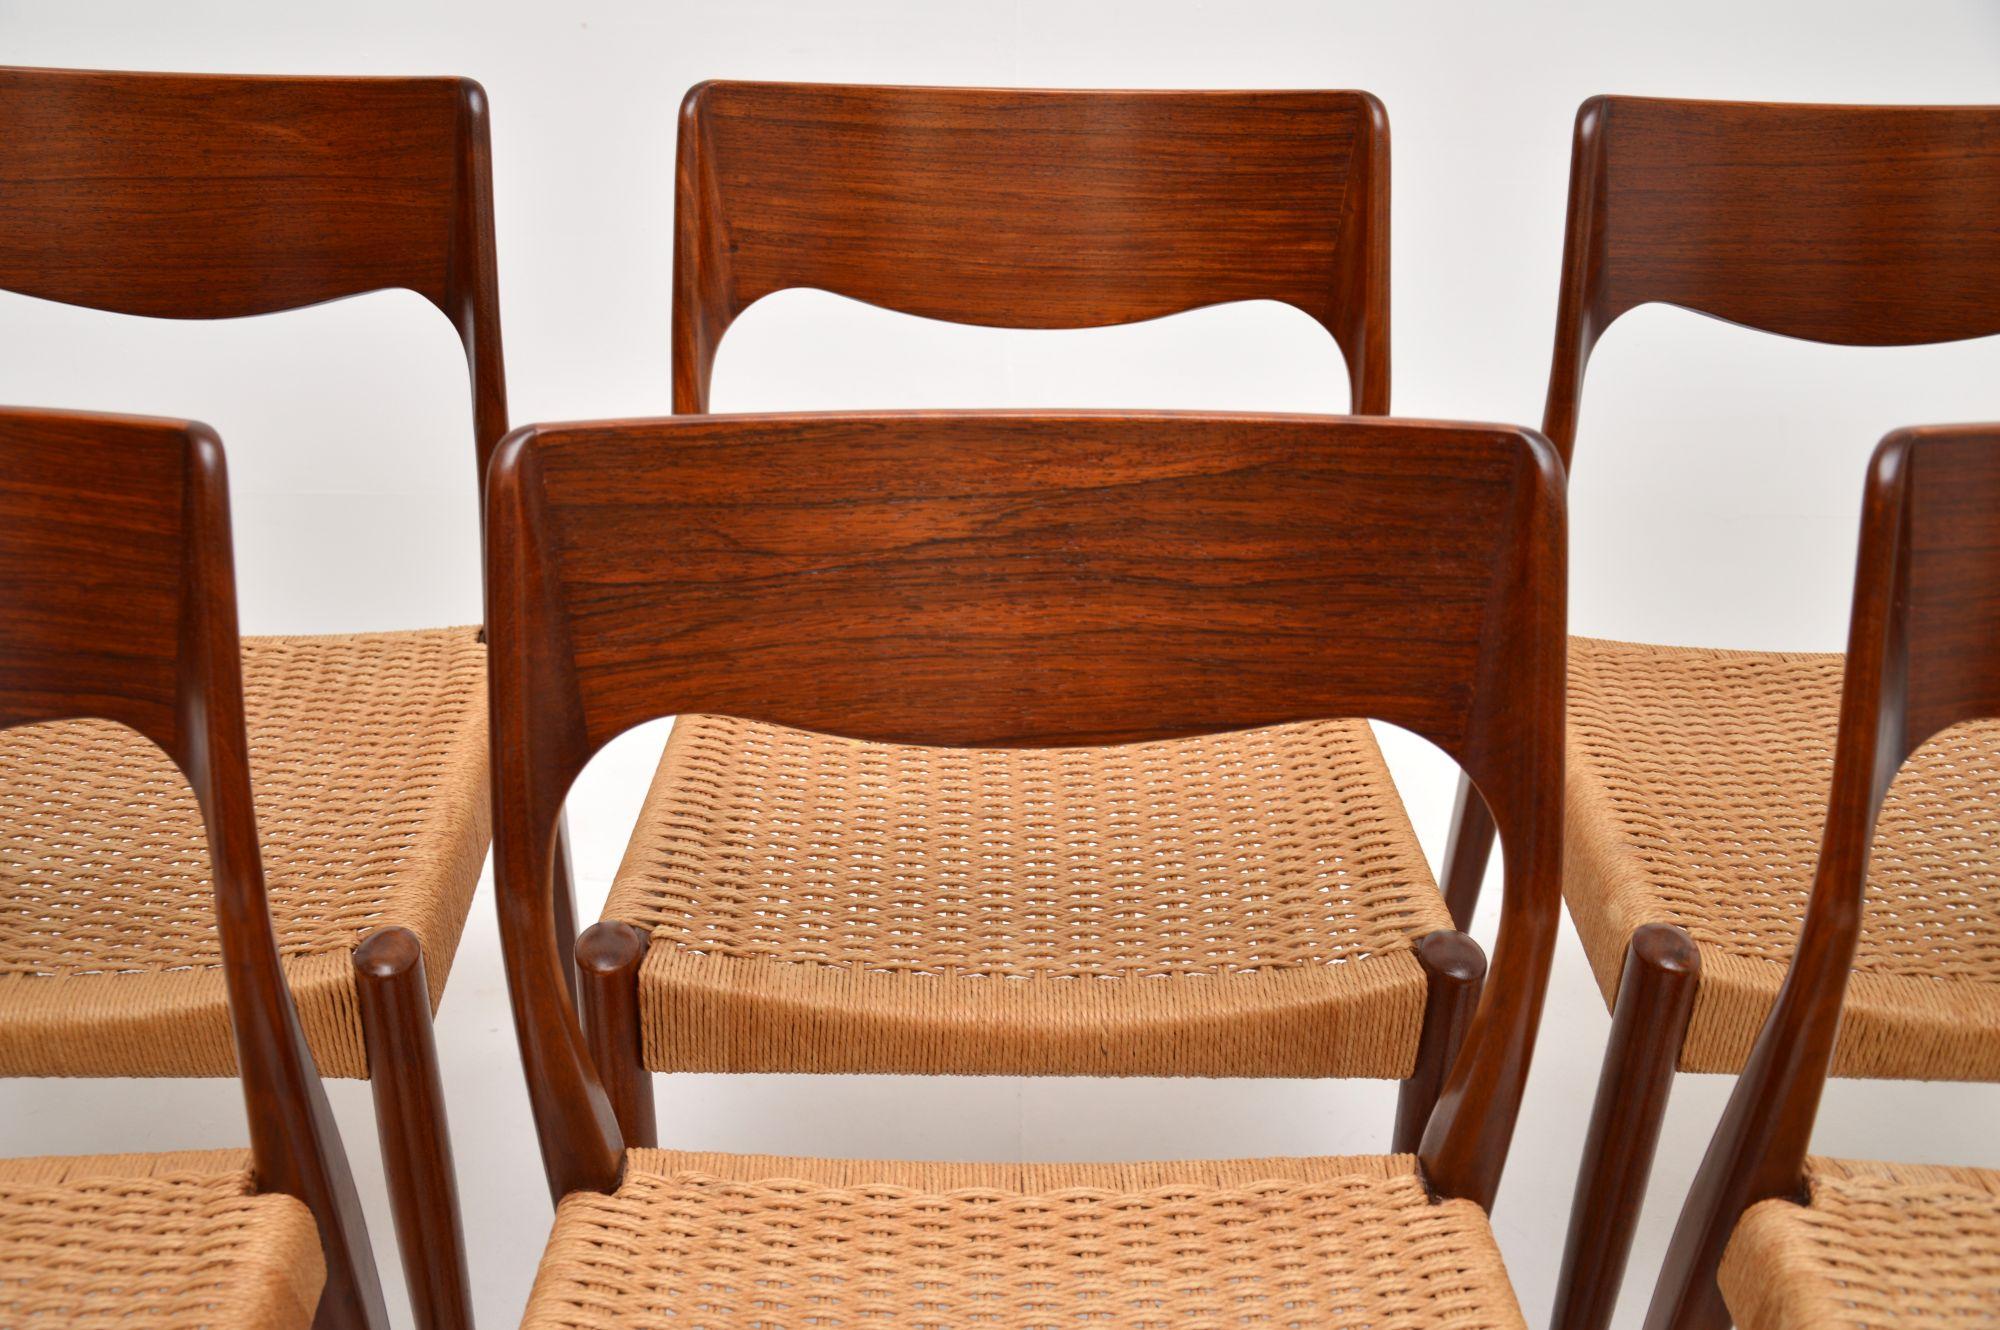 Set of 6 Danish Vintage Dining Chairs by Arne Hovmand-Olsen In Good Condition For Sale In London, GB